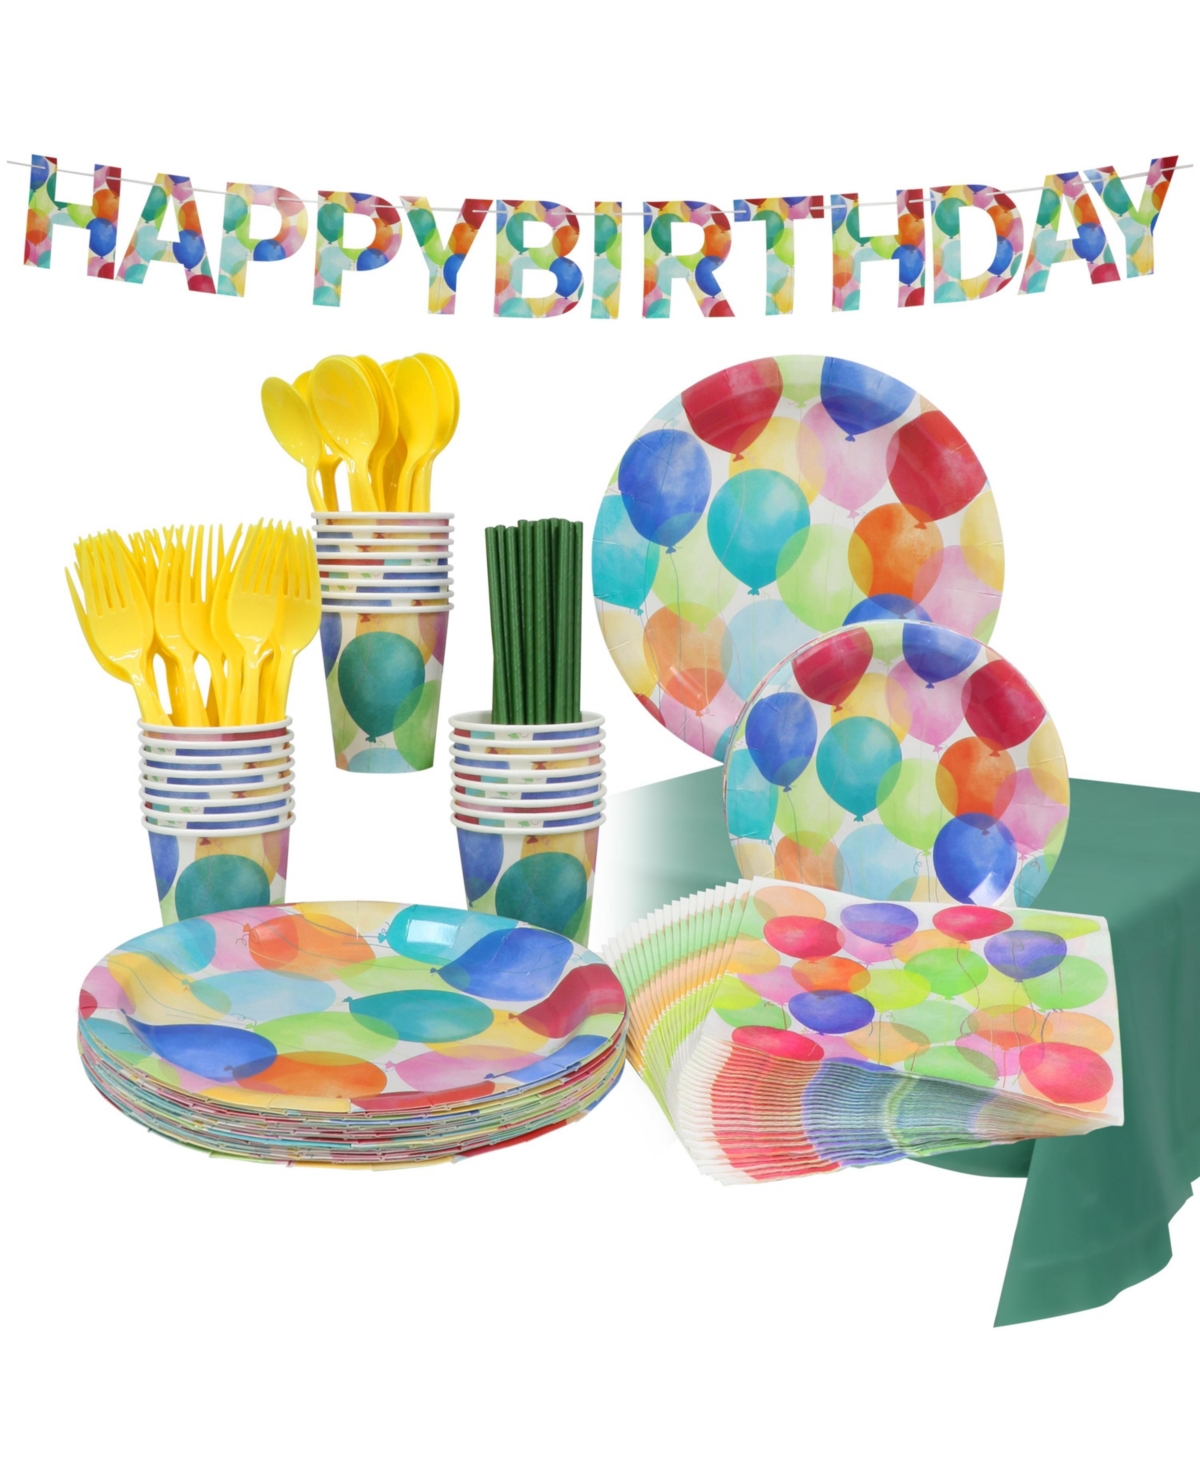 Puleo Disposable Birthday Party Set, Serves 24, With Large And Small Paper Plates, Paper Cups, Straws, Nap In Green,yellow,blue,red